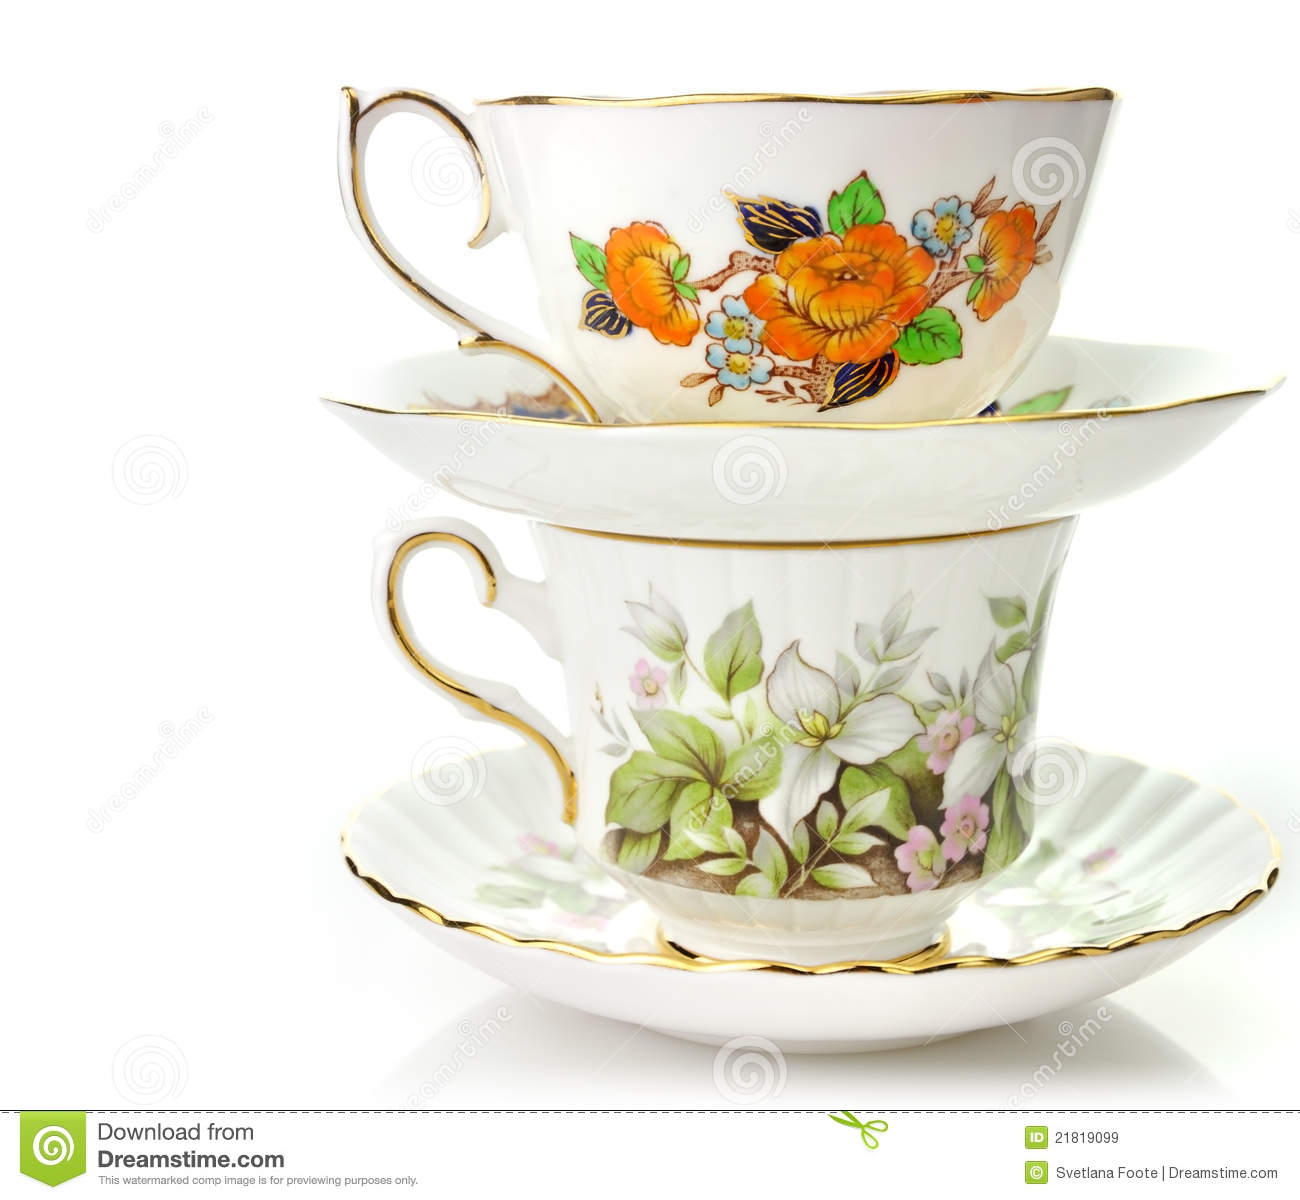 Vintage Coffee Or Tea Cups Royalty Free Stock Images   Image  21819099